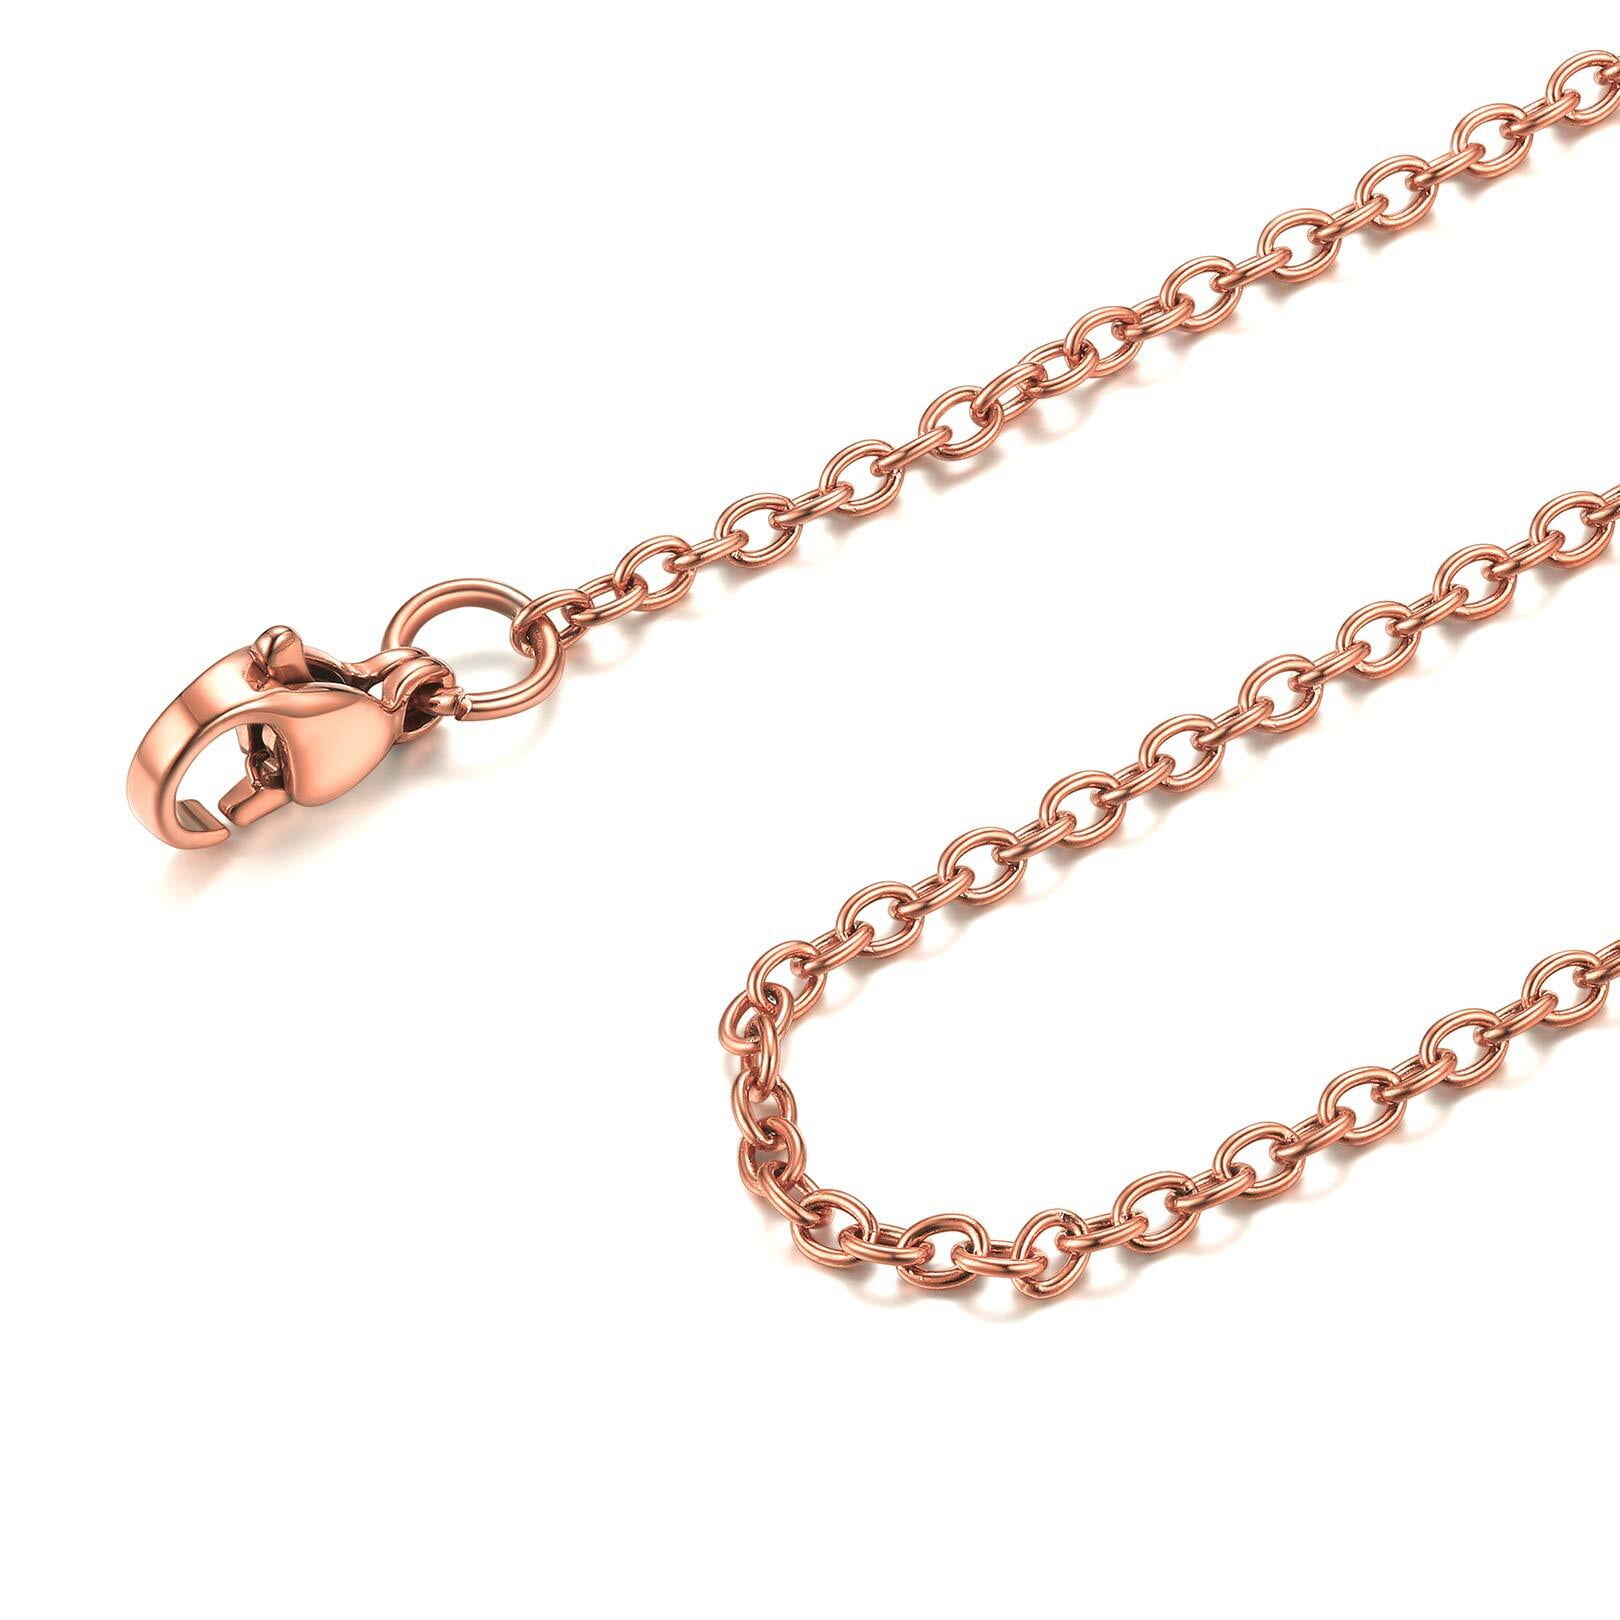 Jewelry Necklace Italian Chain Stainless Steel Non Tarnish Rose Gold Color